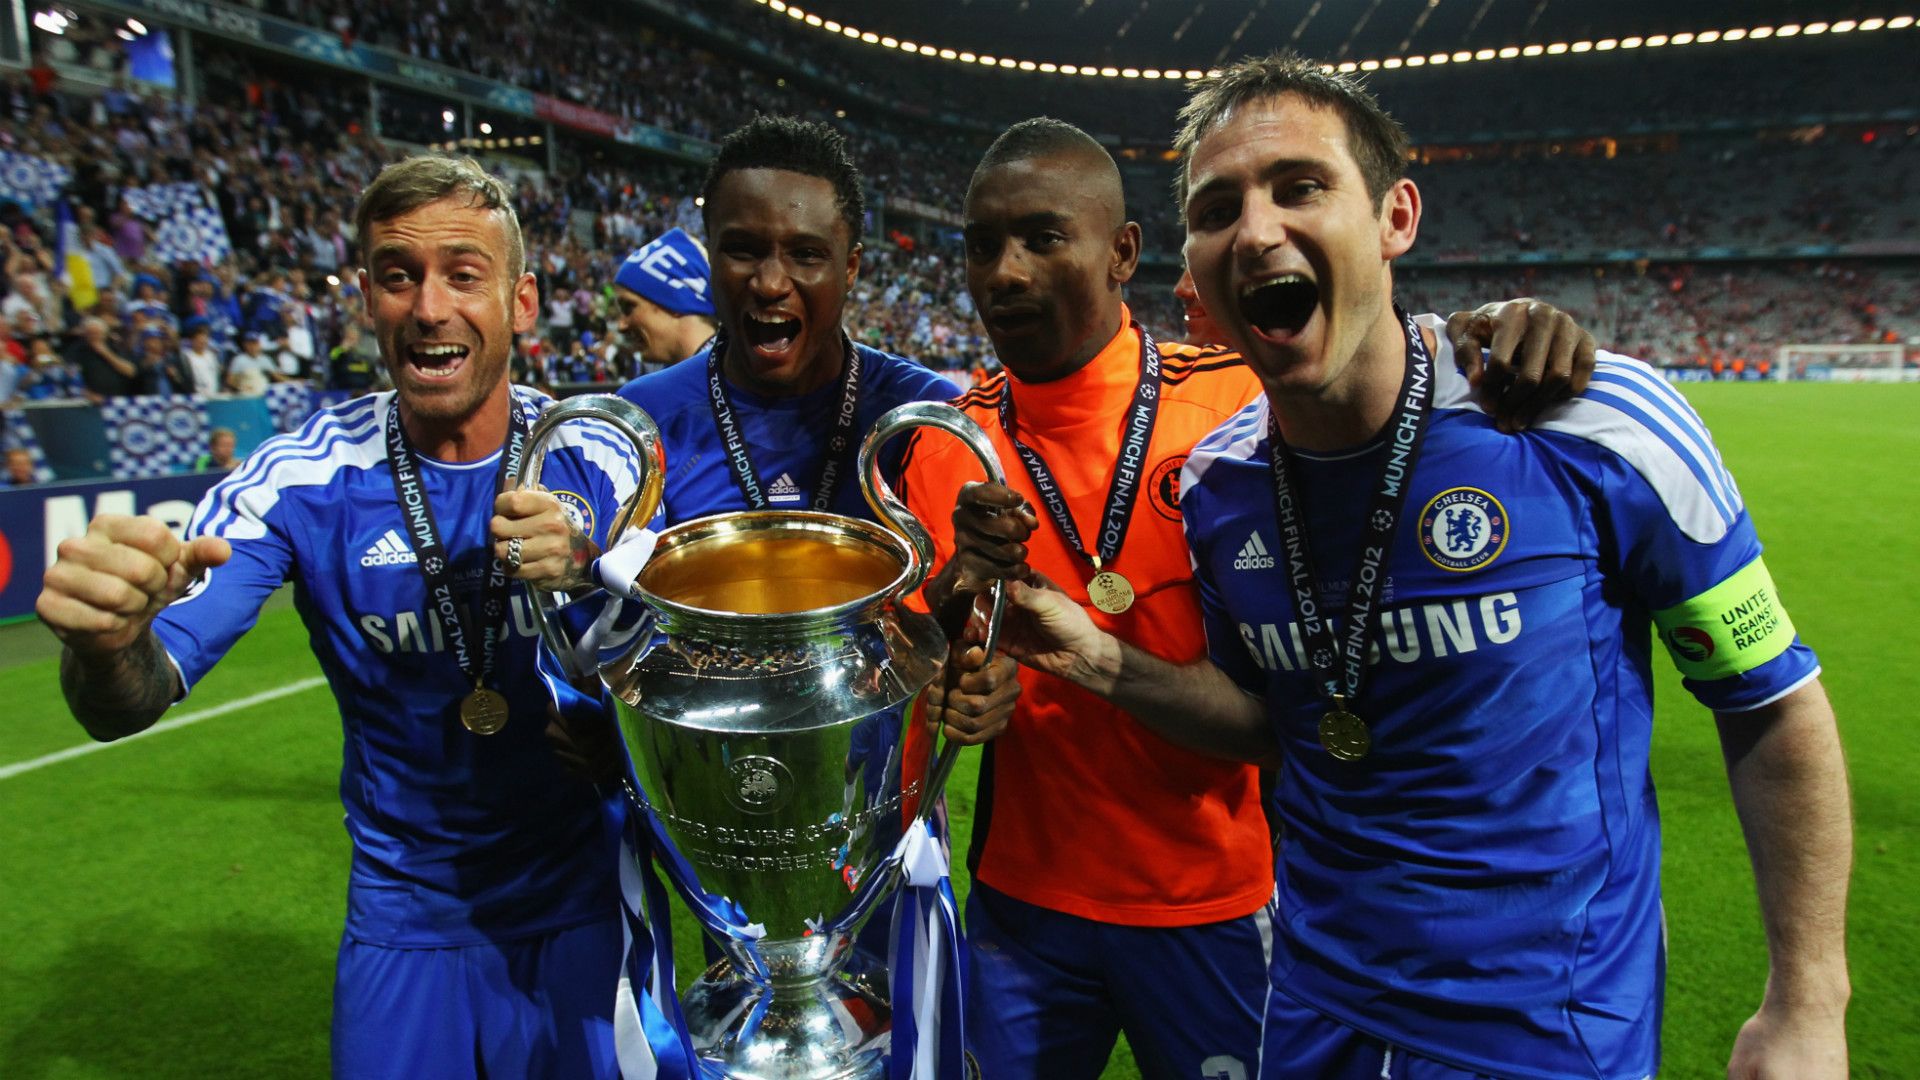 Is Chelsea 2012 the pinnacle of African football achievement?